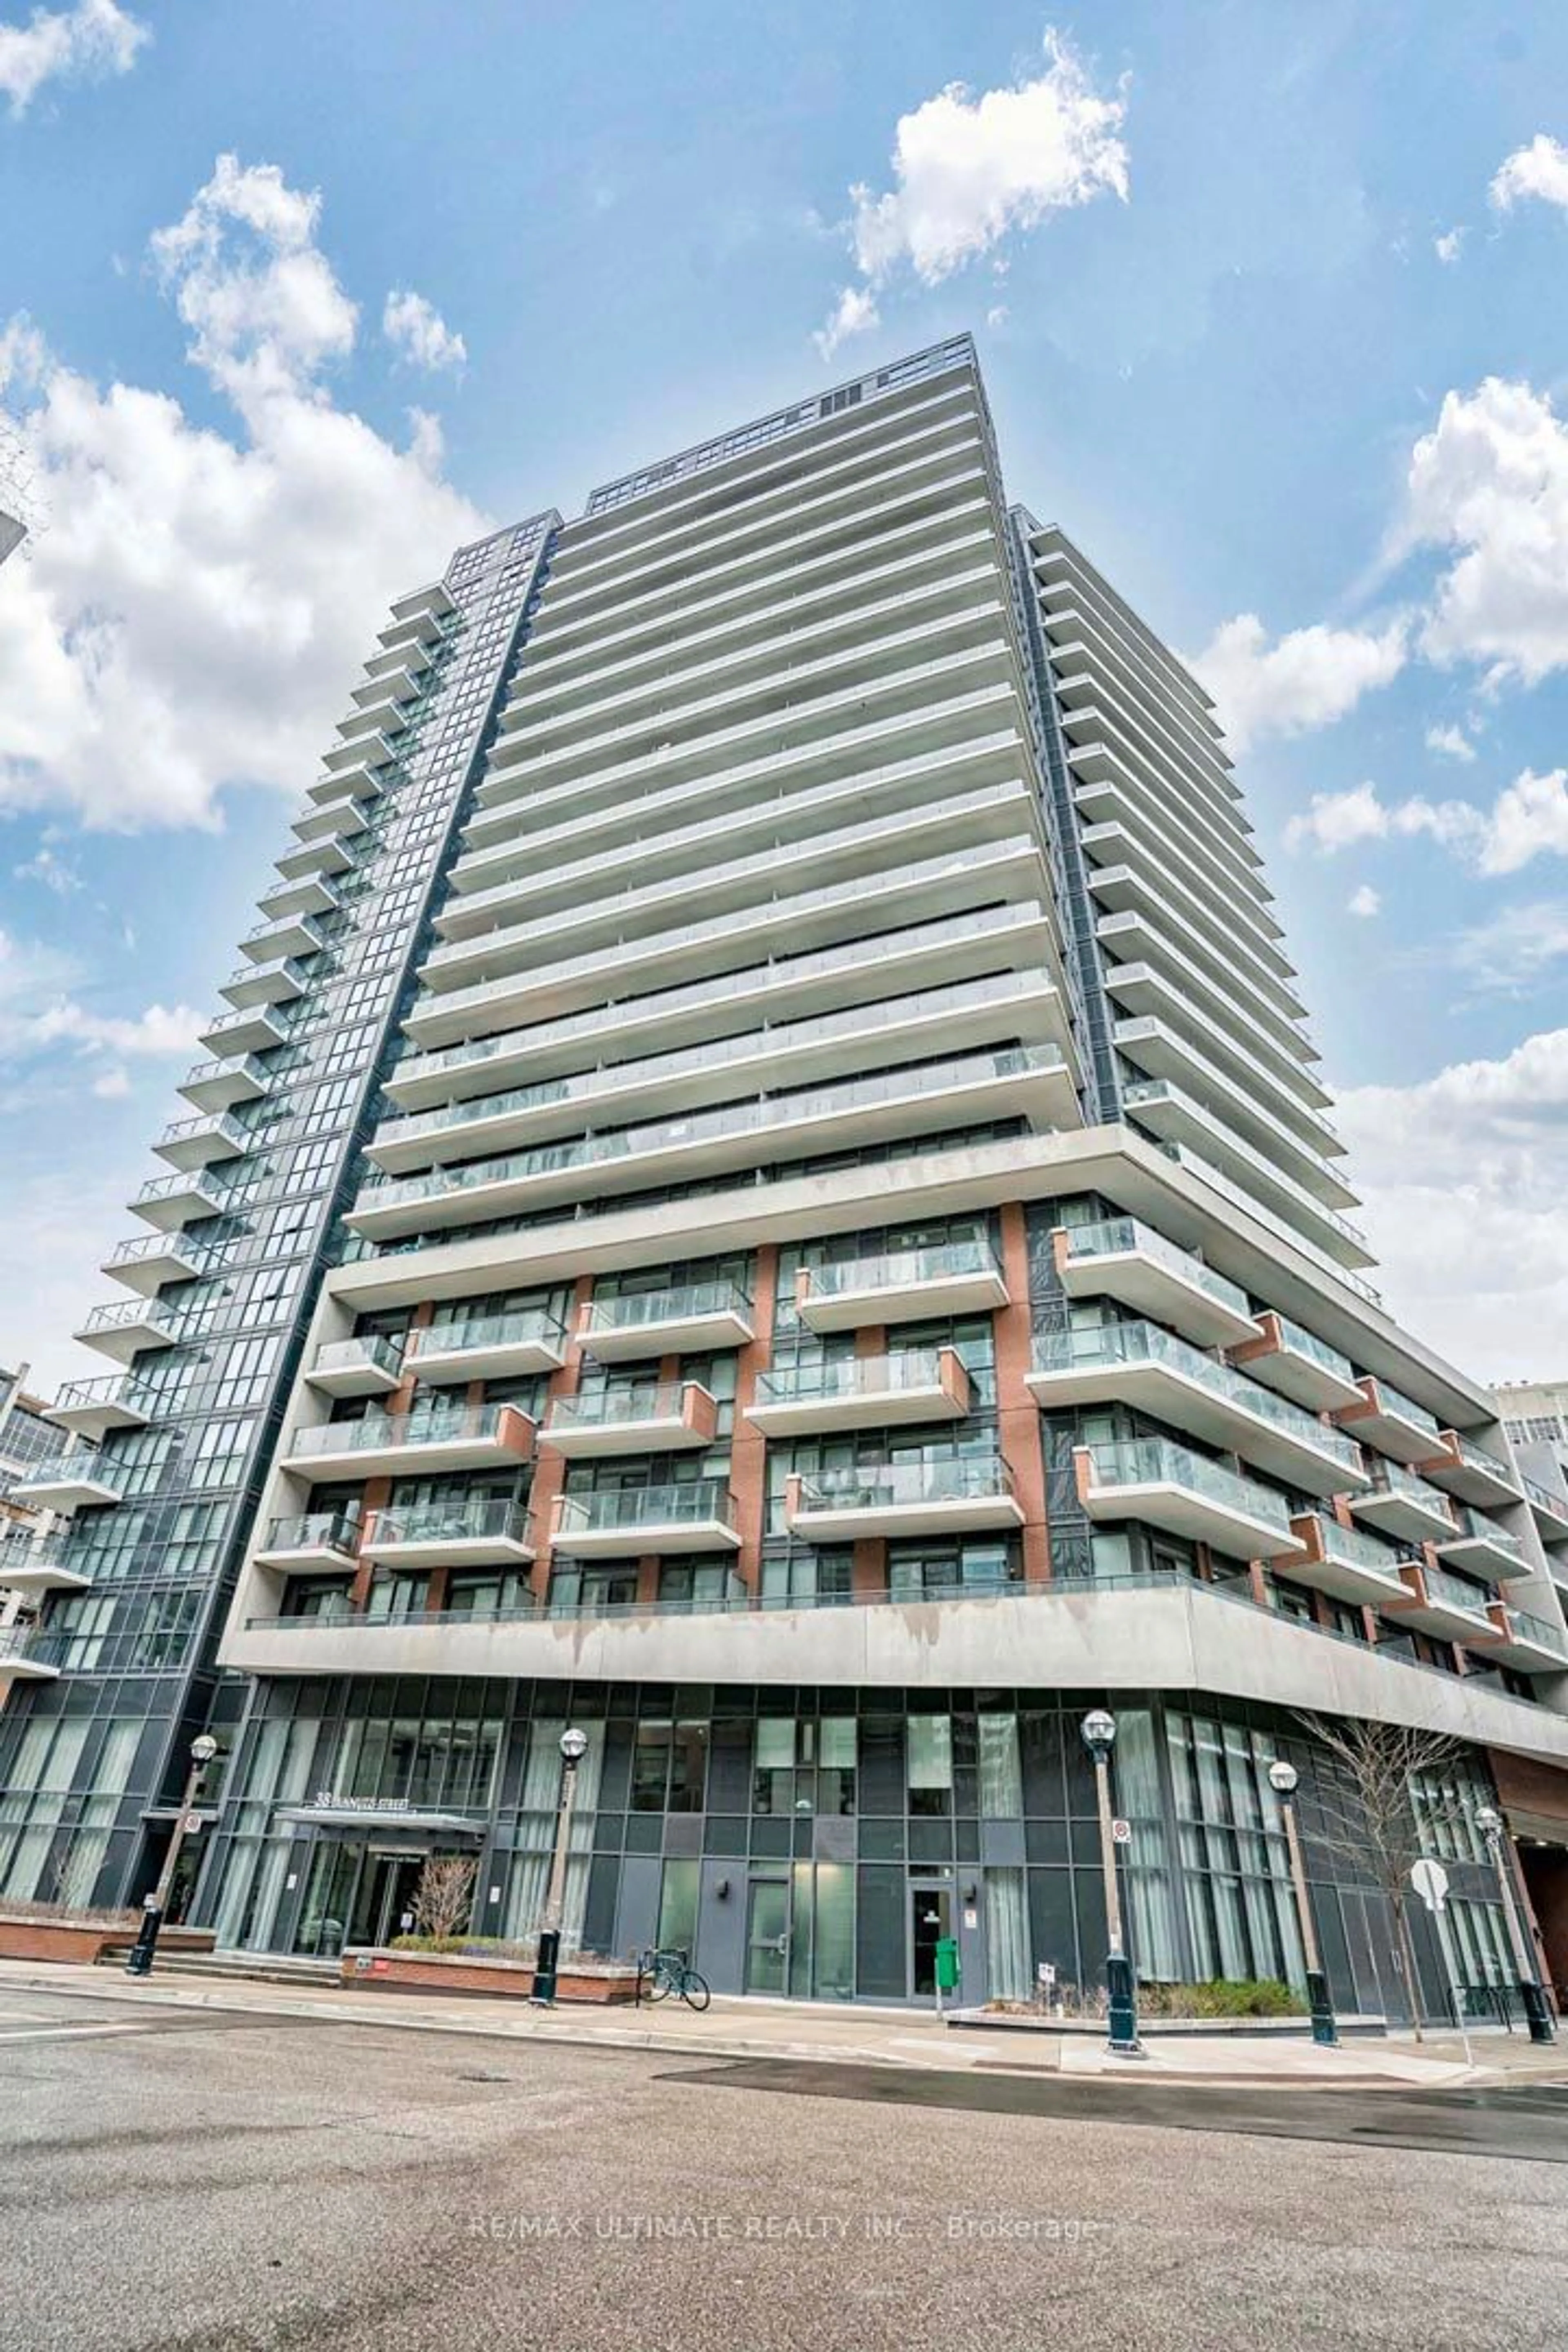 A pic from exterior of the house or condo for 38 Iannuzzi St #607, Toronto Ontario M5V 0S2